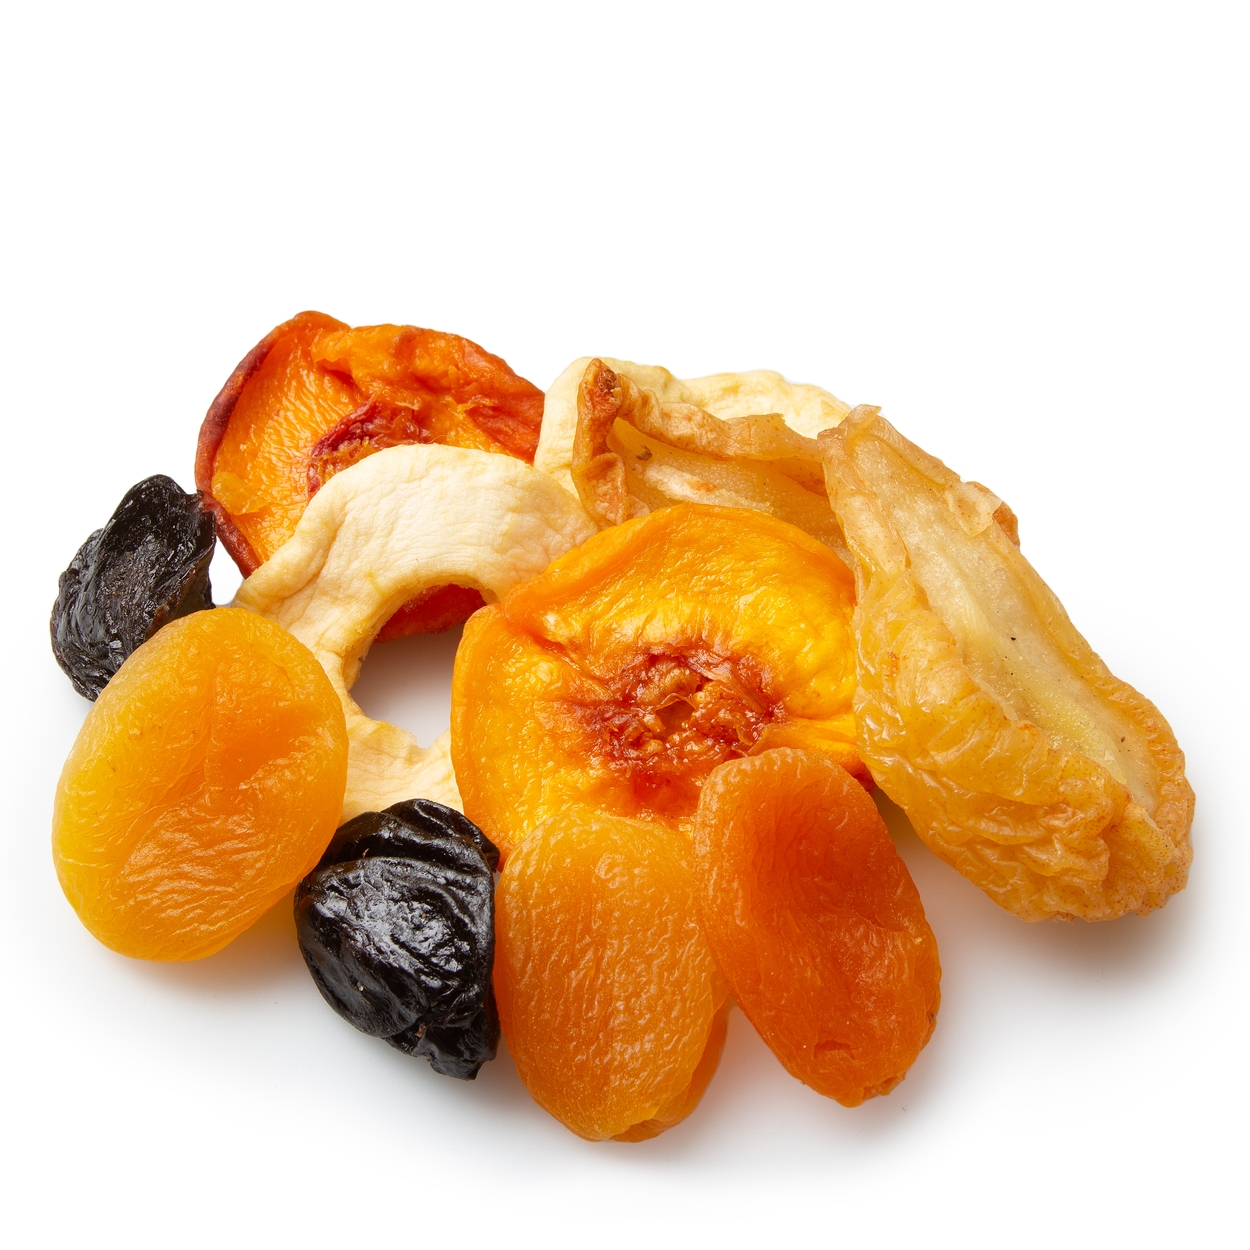 How To Keep Nuts and Dried Fruit Fresh?